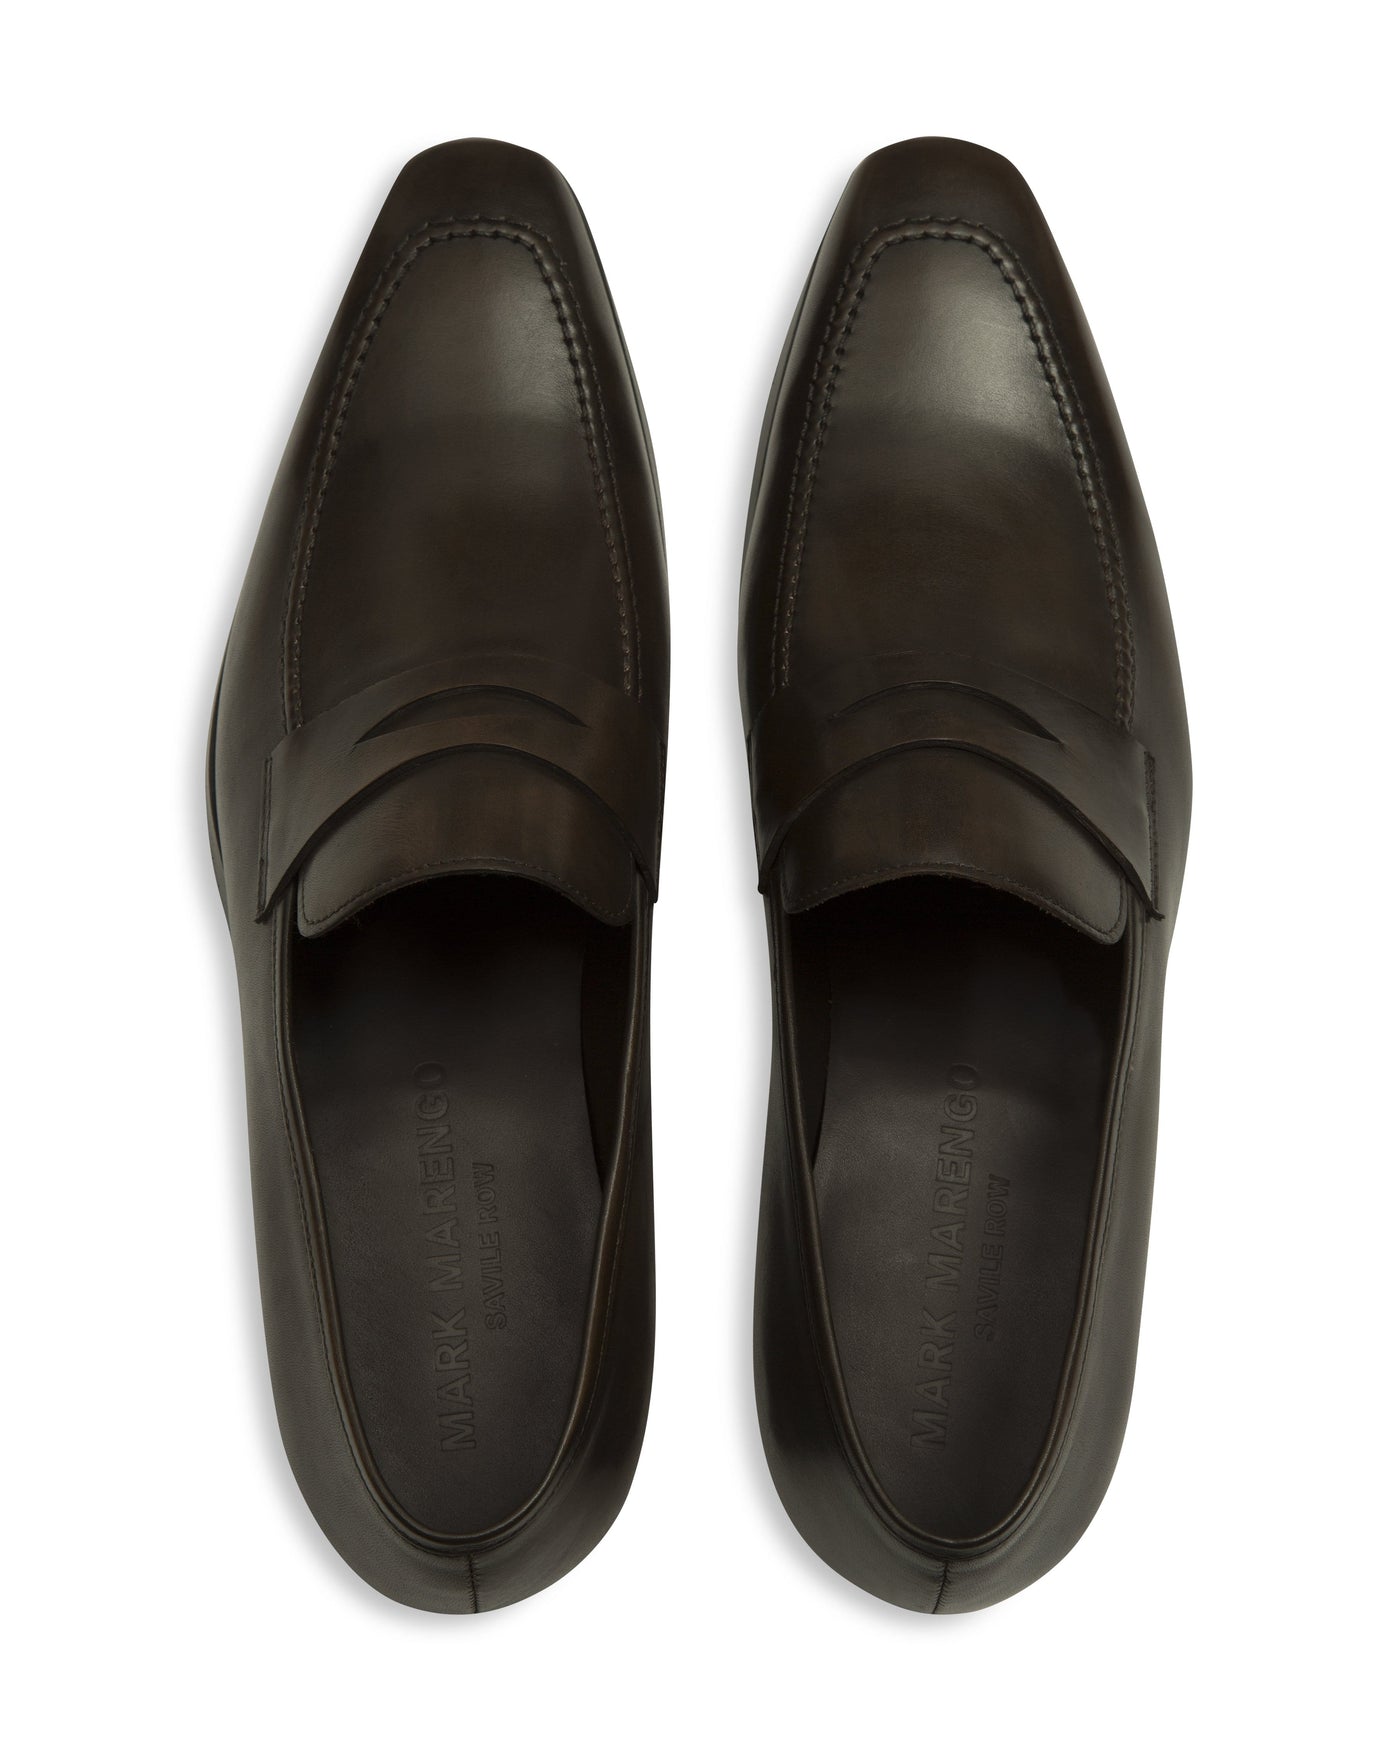 Dark Brown Hand-Stitched Penny Loafer